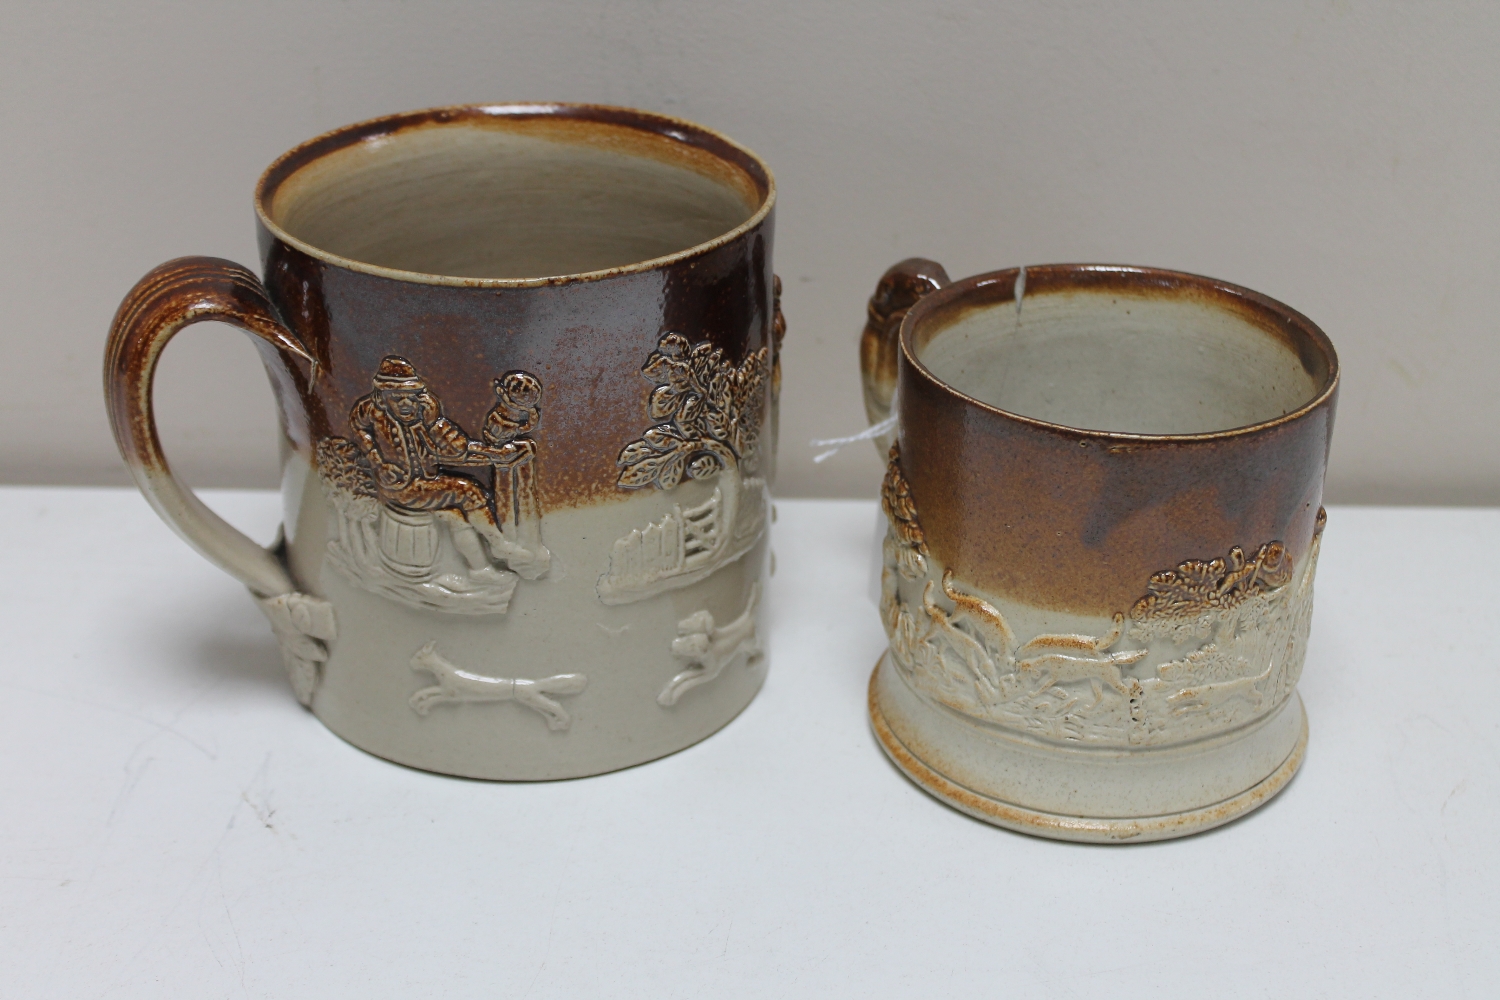 Two antique stoneware mugs depicting hunting and farming scenes.